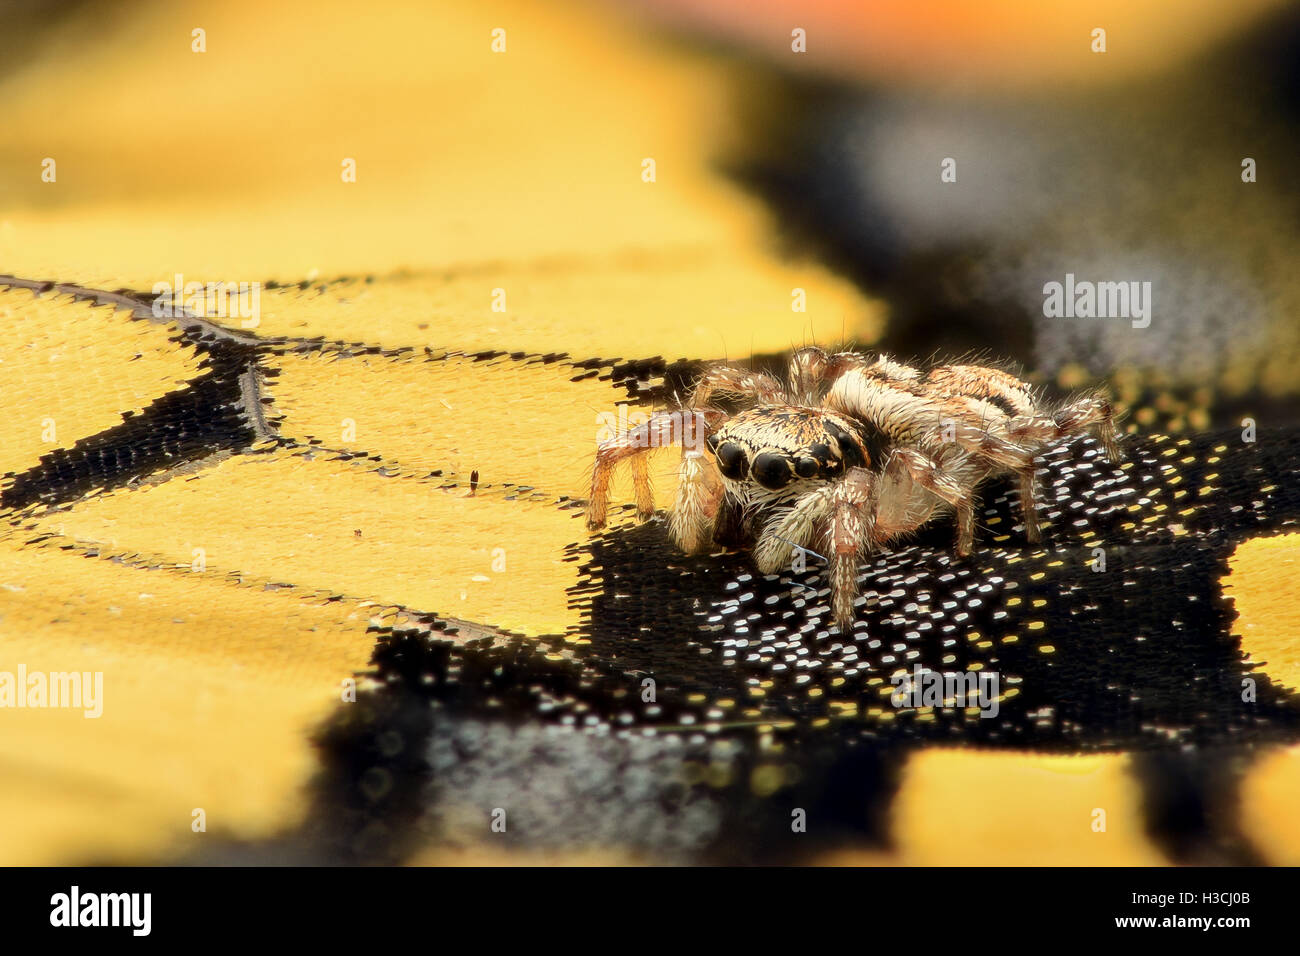 Extreme magnification - Jumping Spider on a butterfly wing Stock Photo